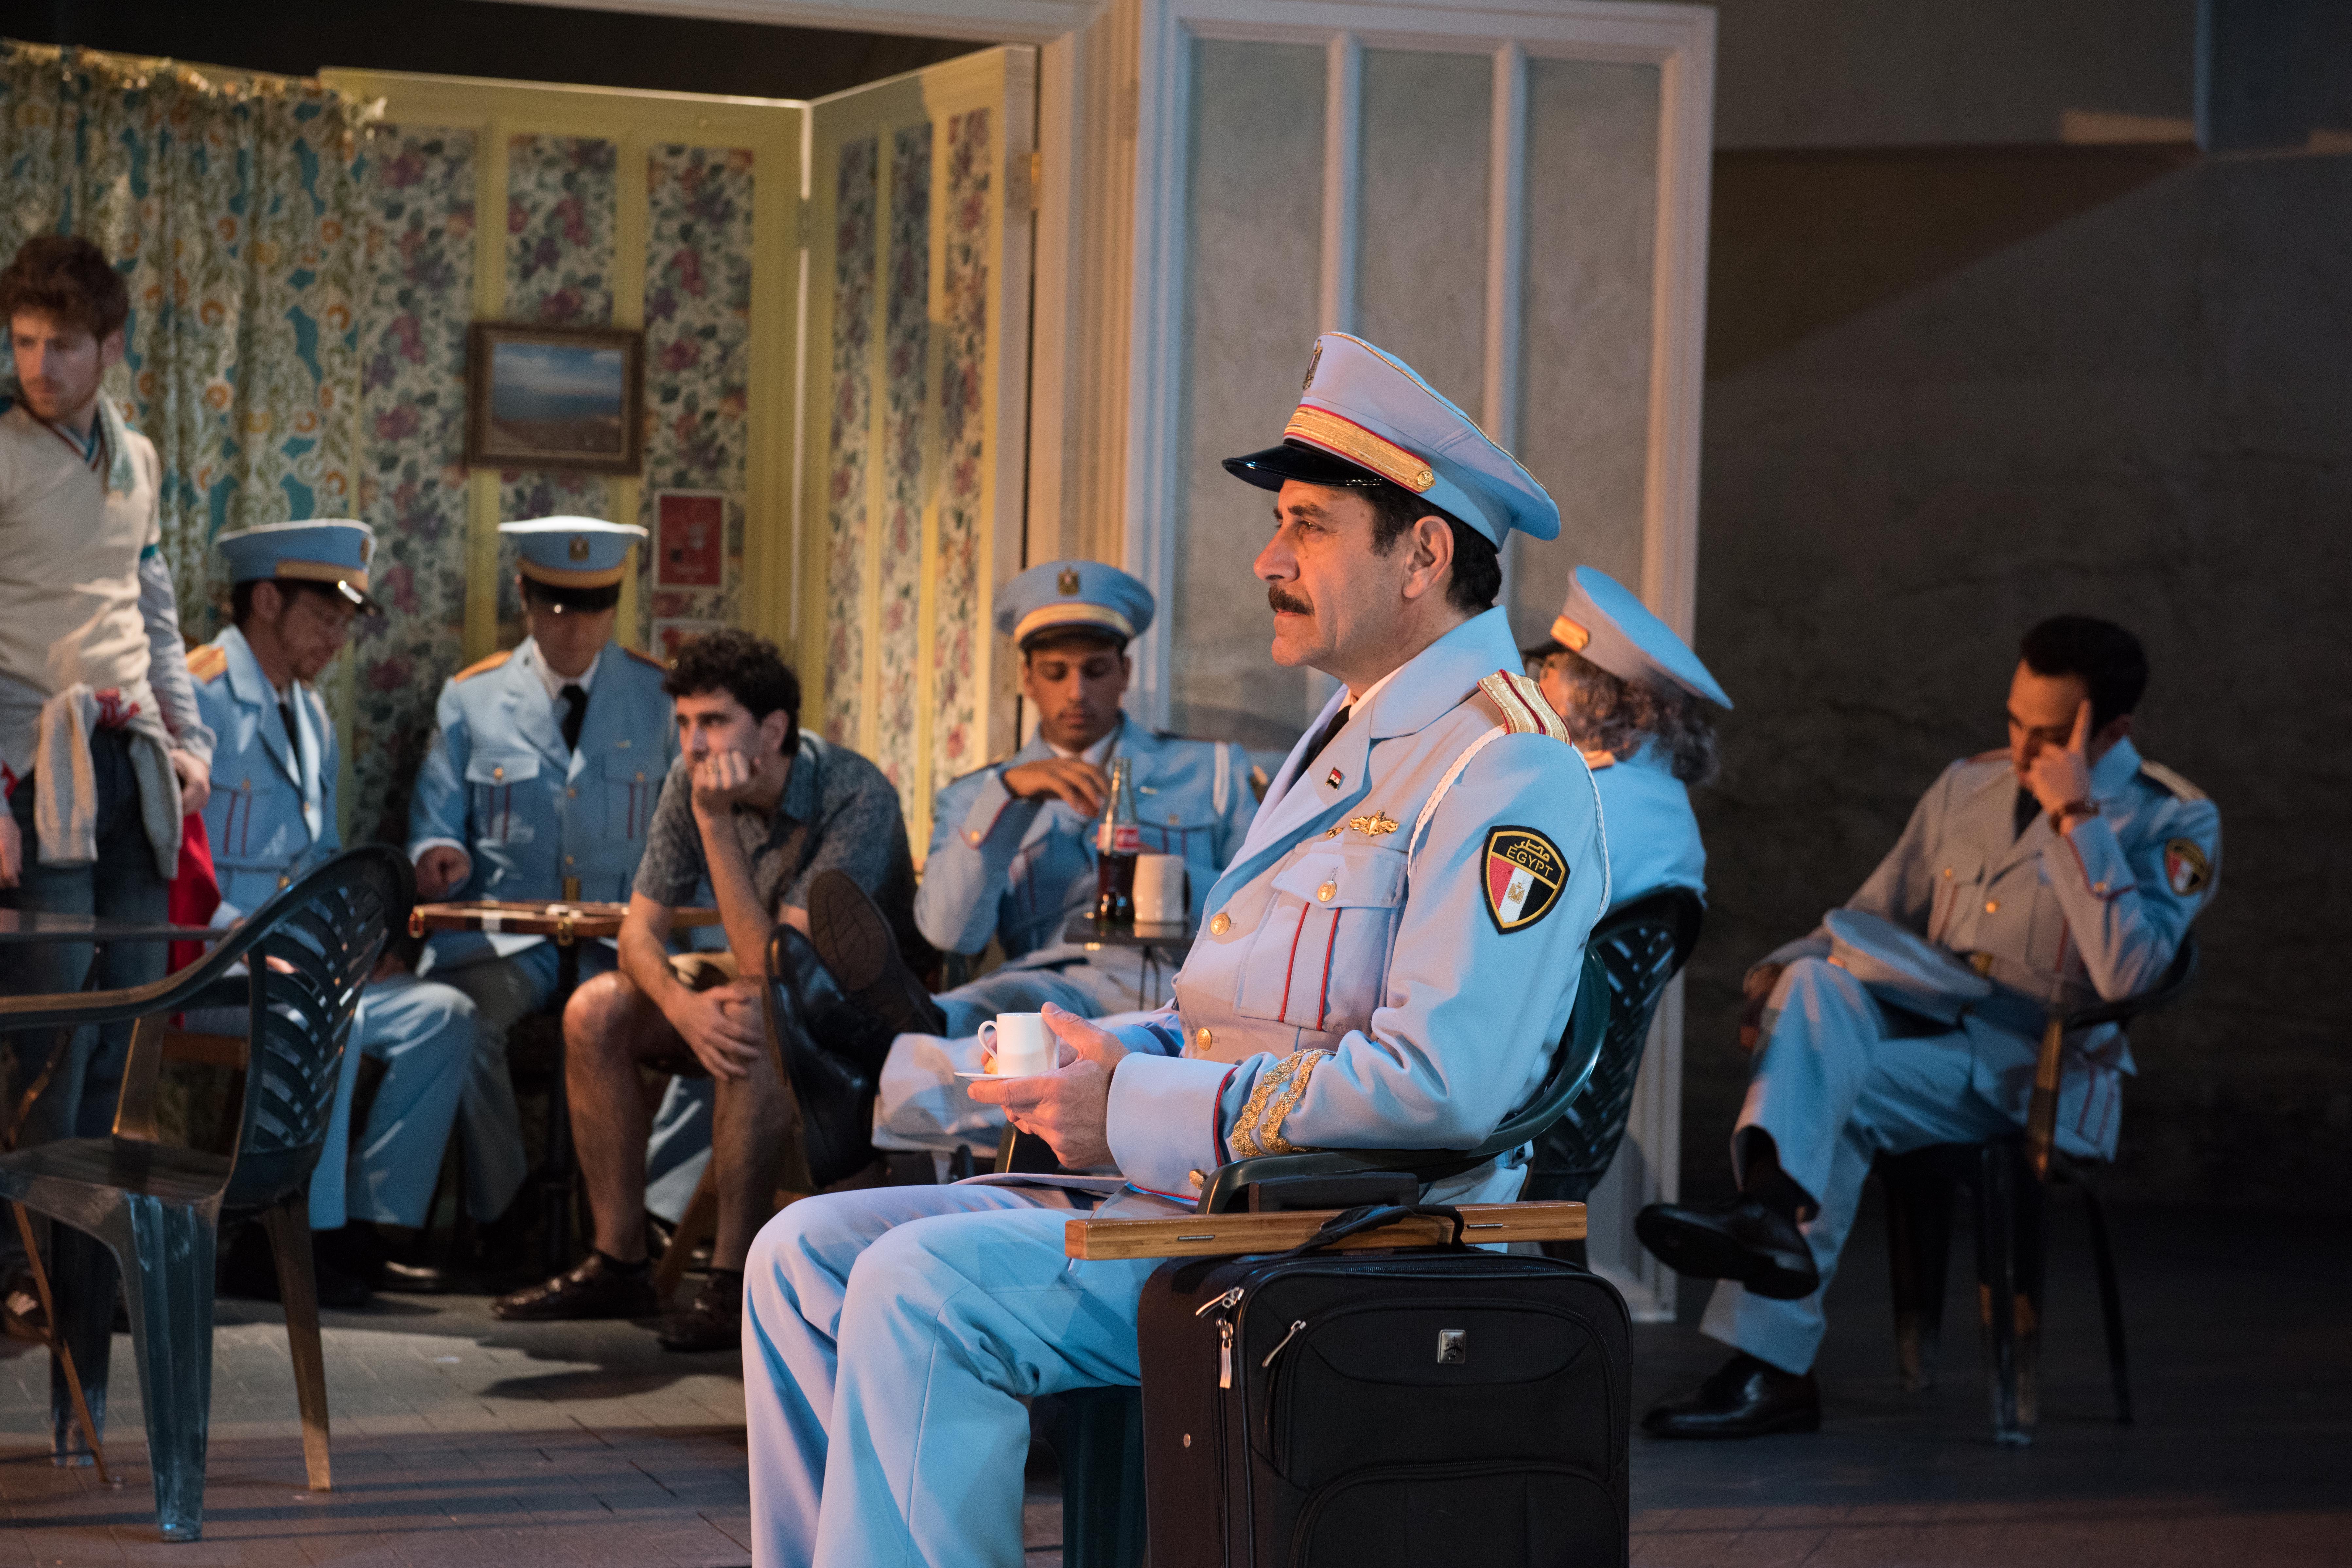 Tony Shalhoub as Tewfiq in The Band's Visit. 